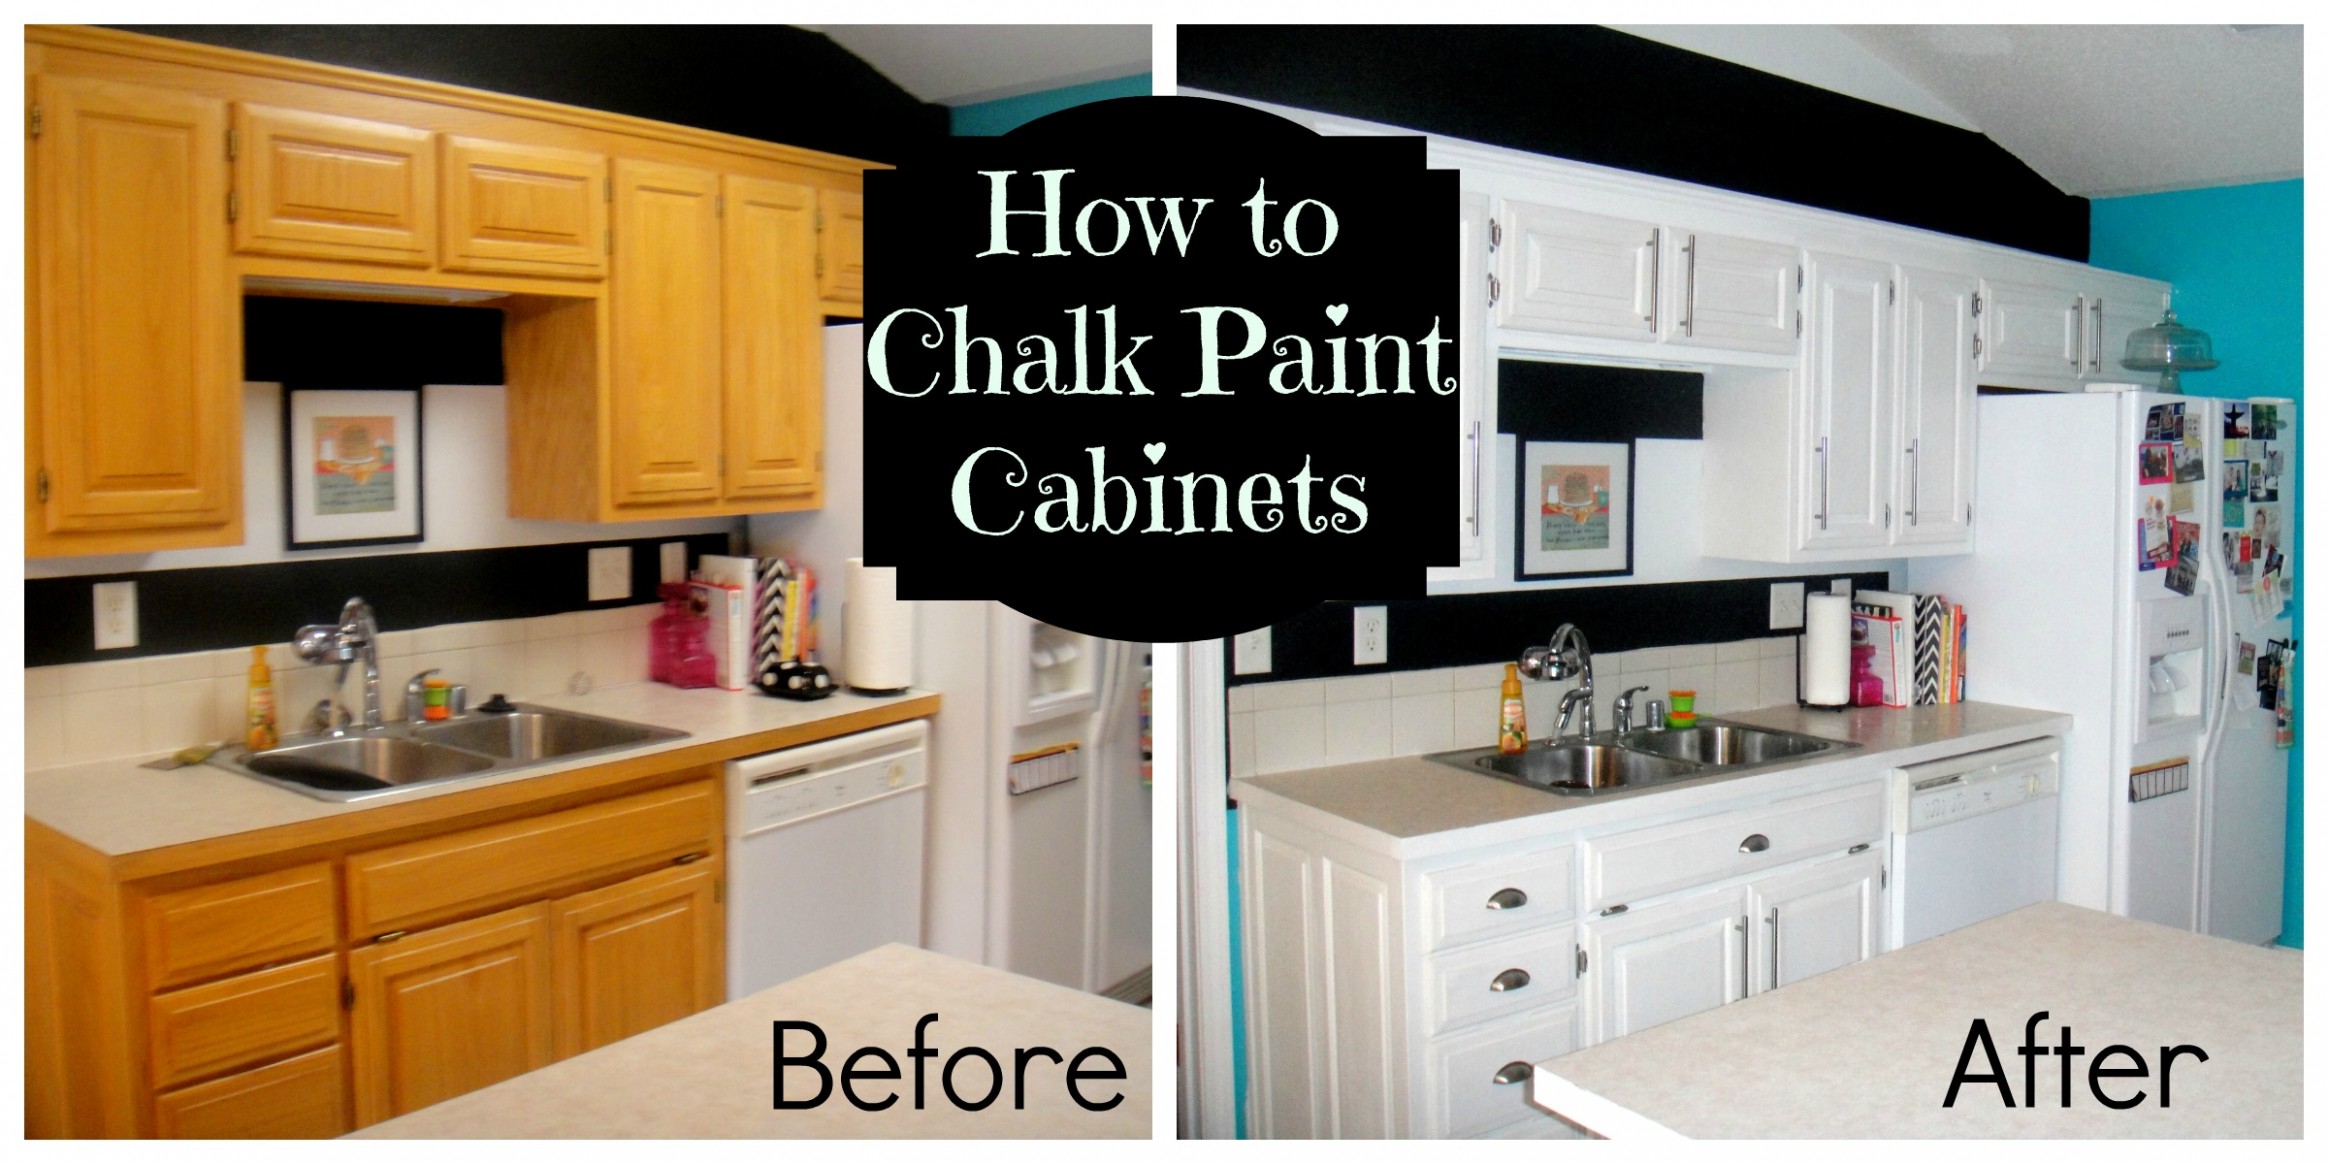 How To Chalk Paint | Decorate My Life Annie Sloan Chalk Paint Cabinets